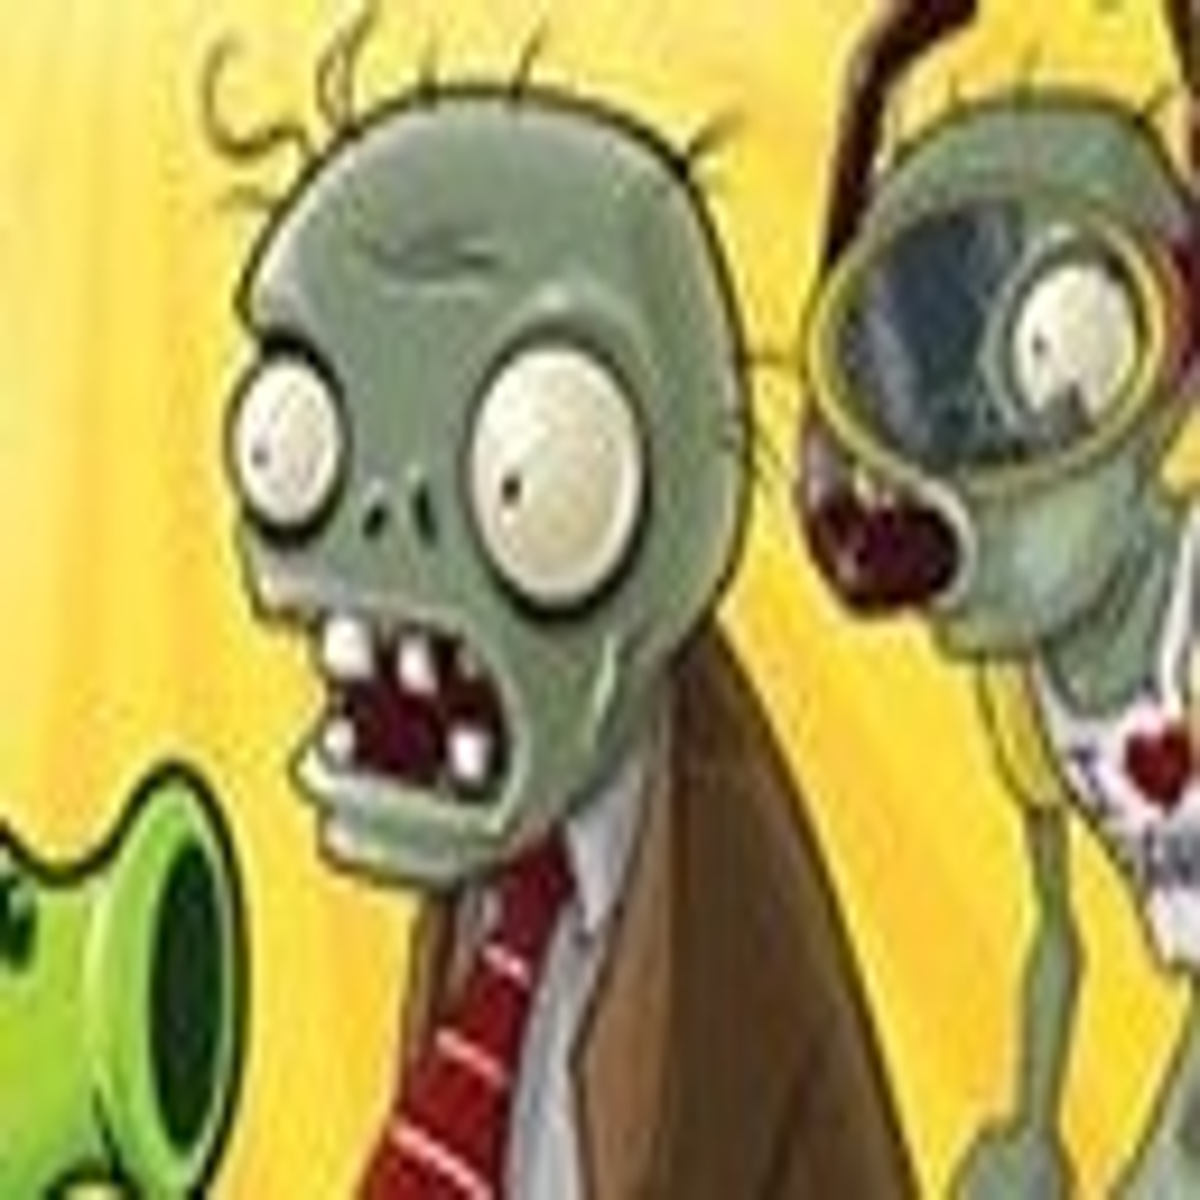 Free PC/Mac download from Origin: Plants vs. Zombies Game of the